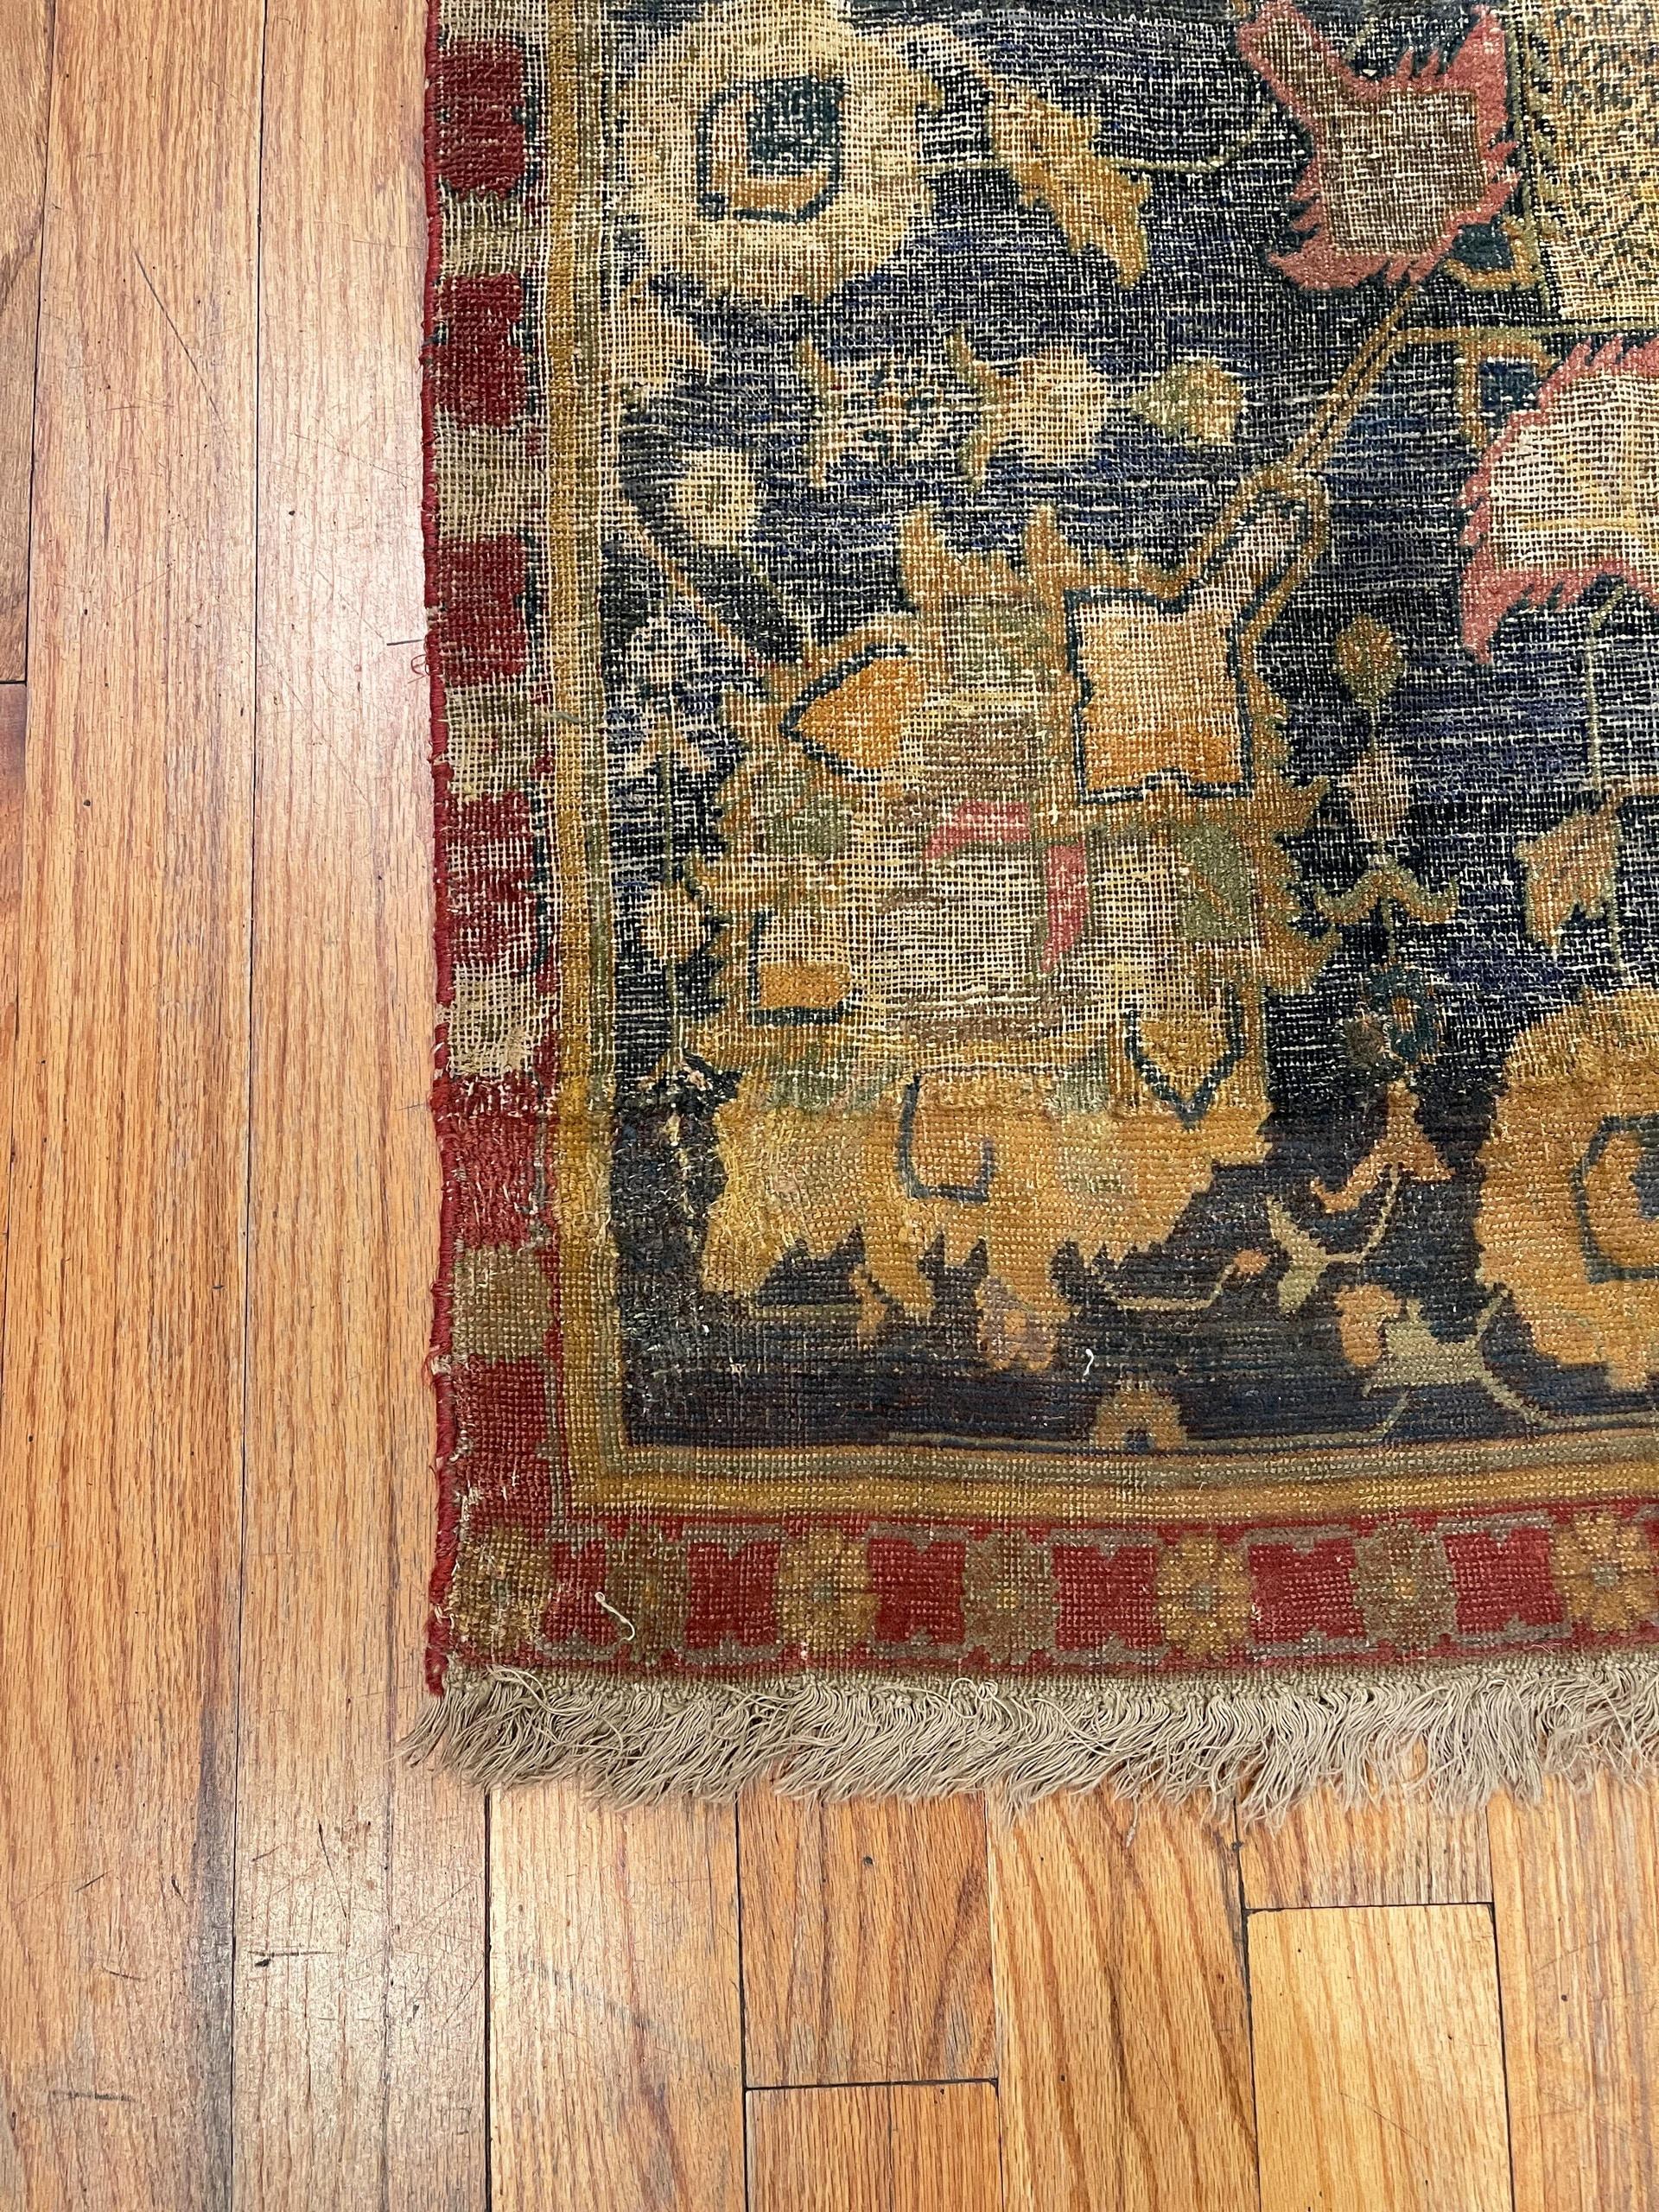 Other A Breathtaking Rare 17th Century Large Antique Persian Isfahan Rug 12'3